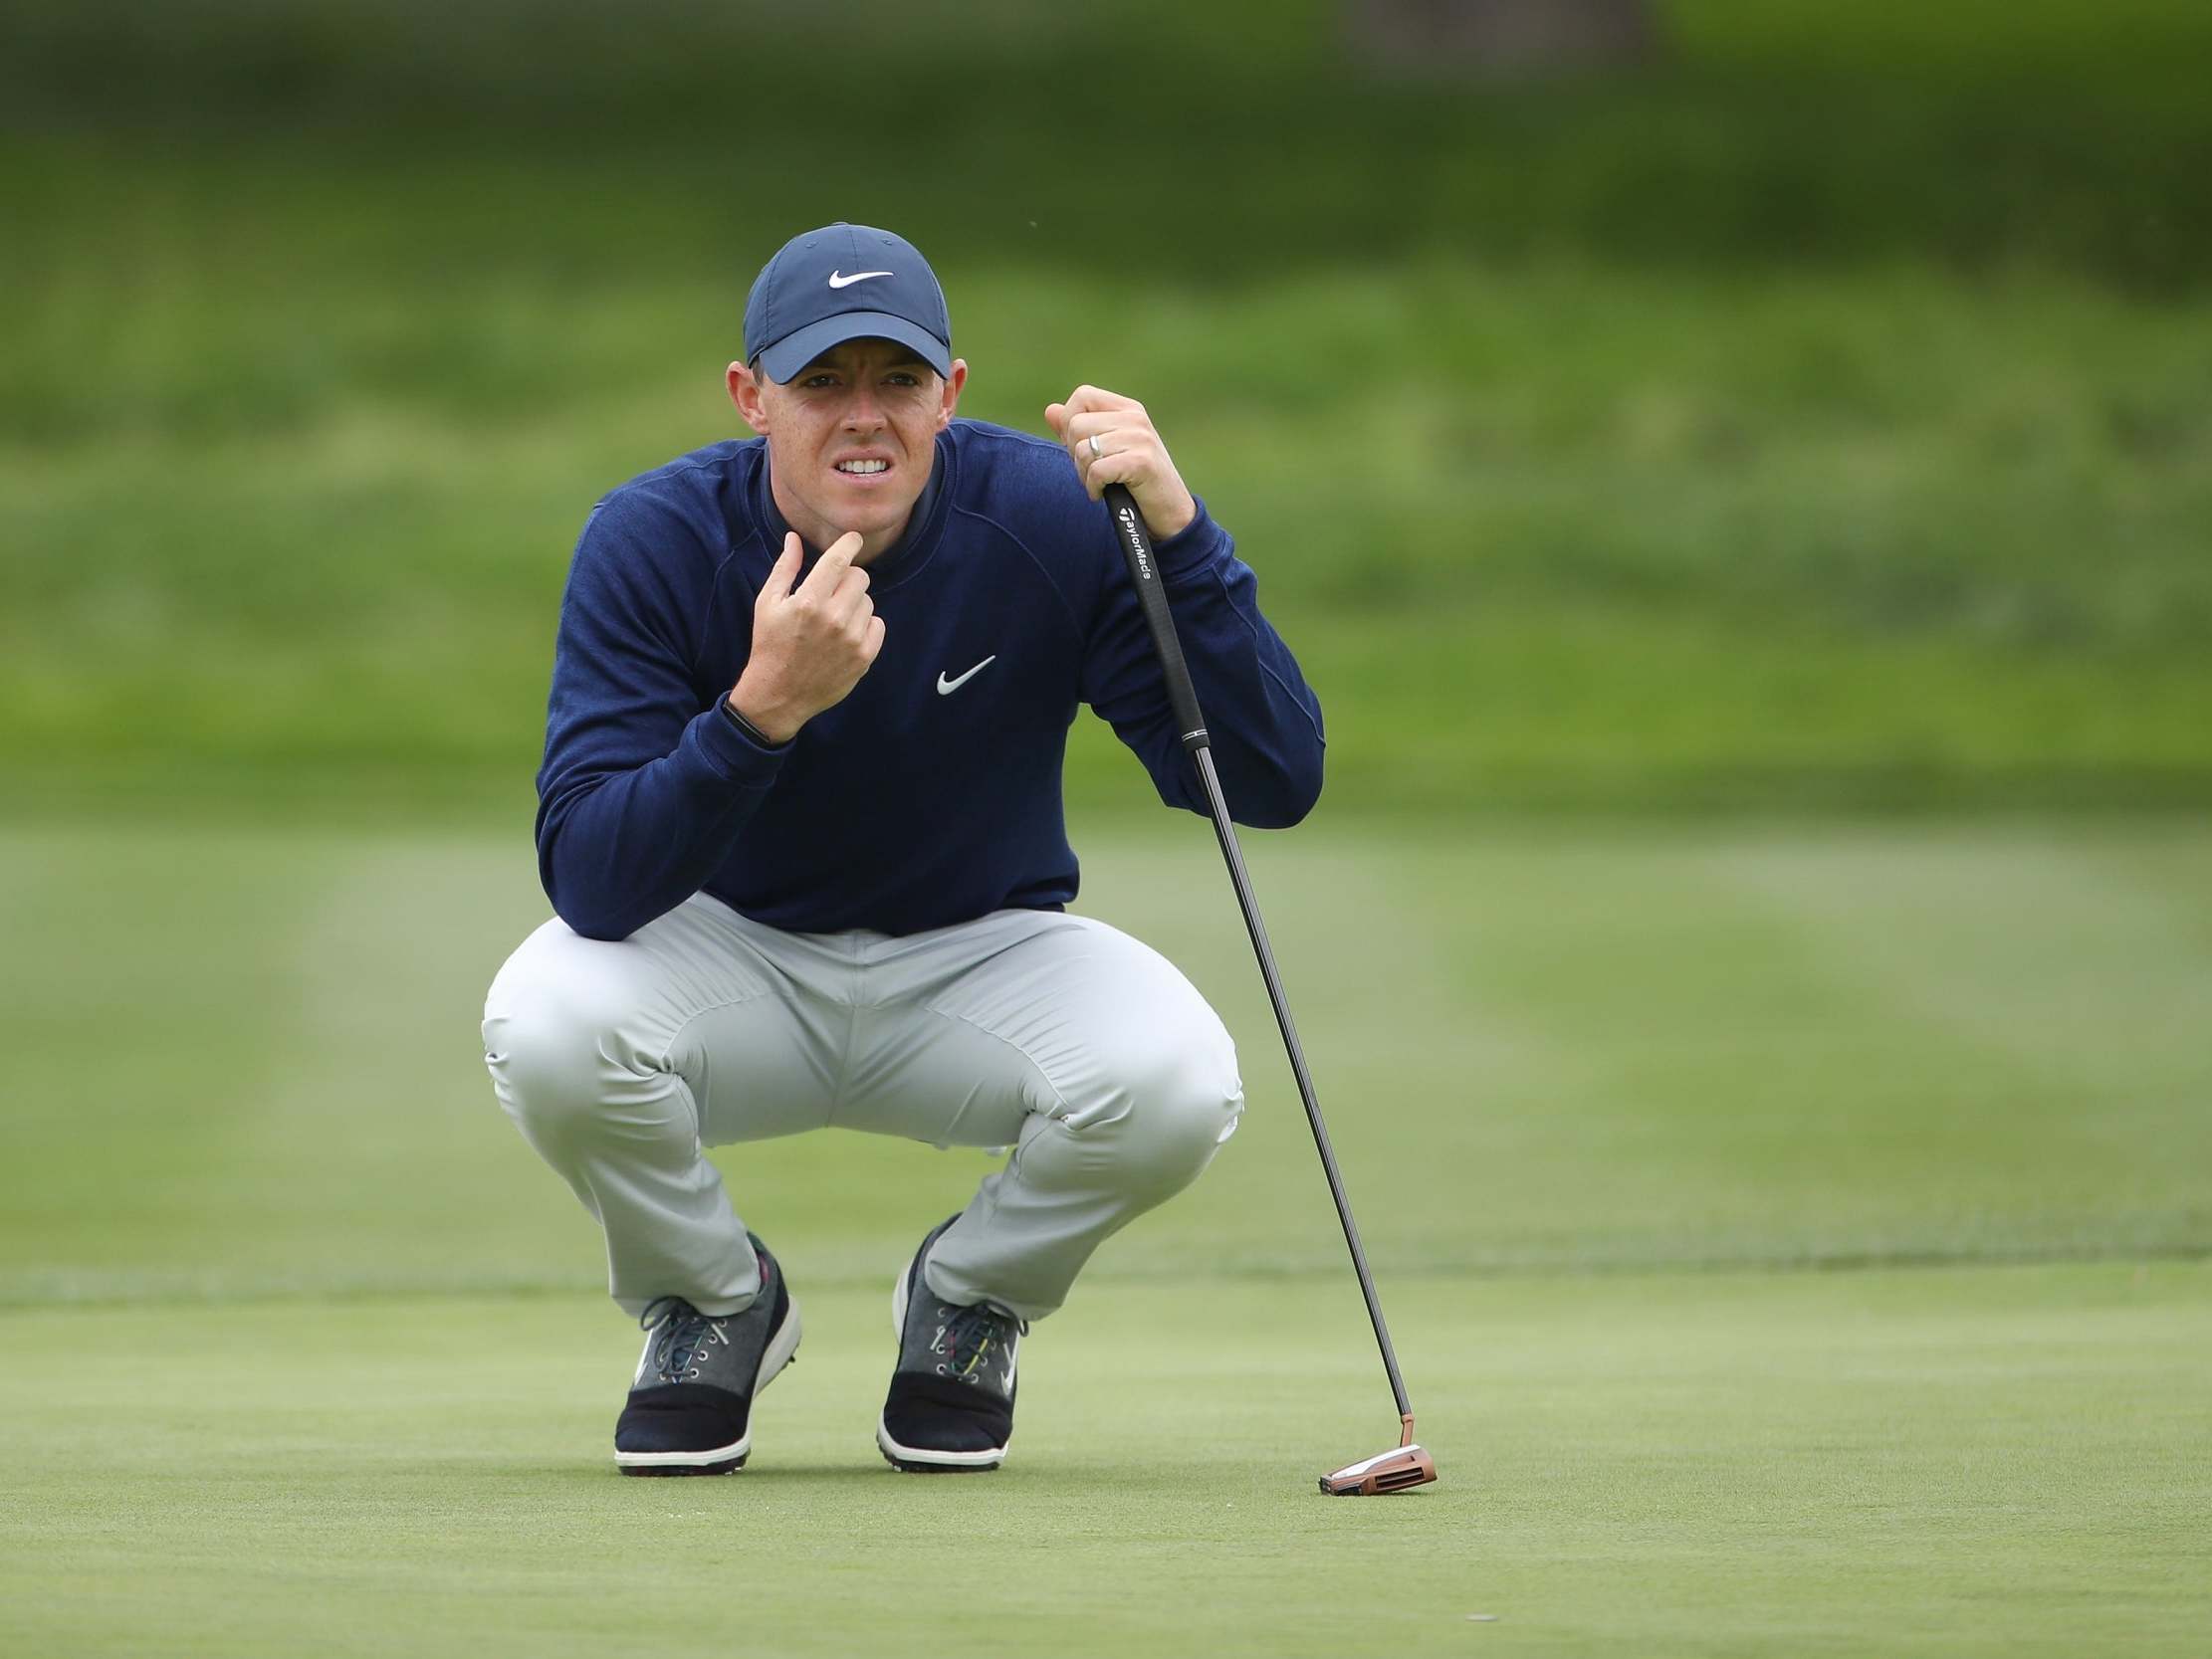 Rory McIlroy needs a big finish to stand a chance of winning